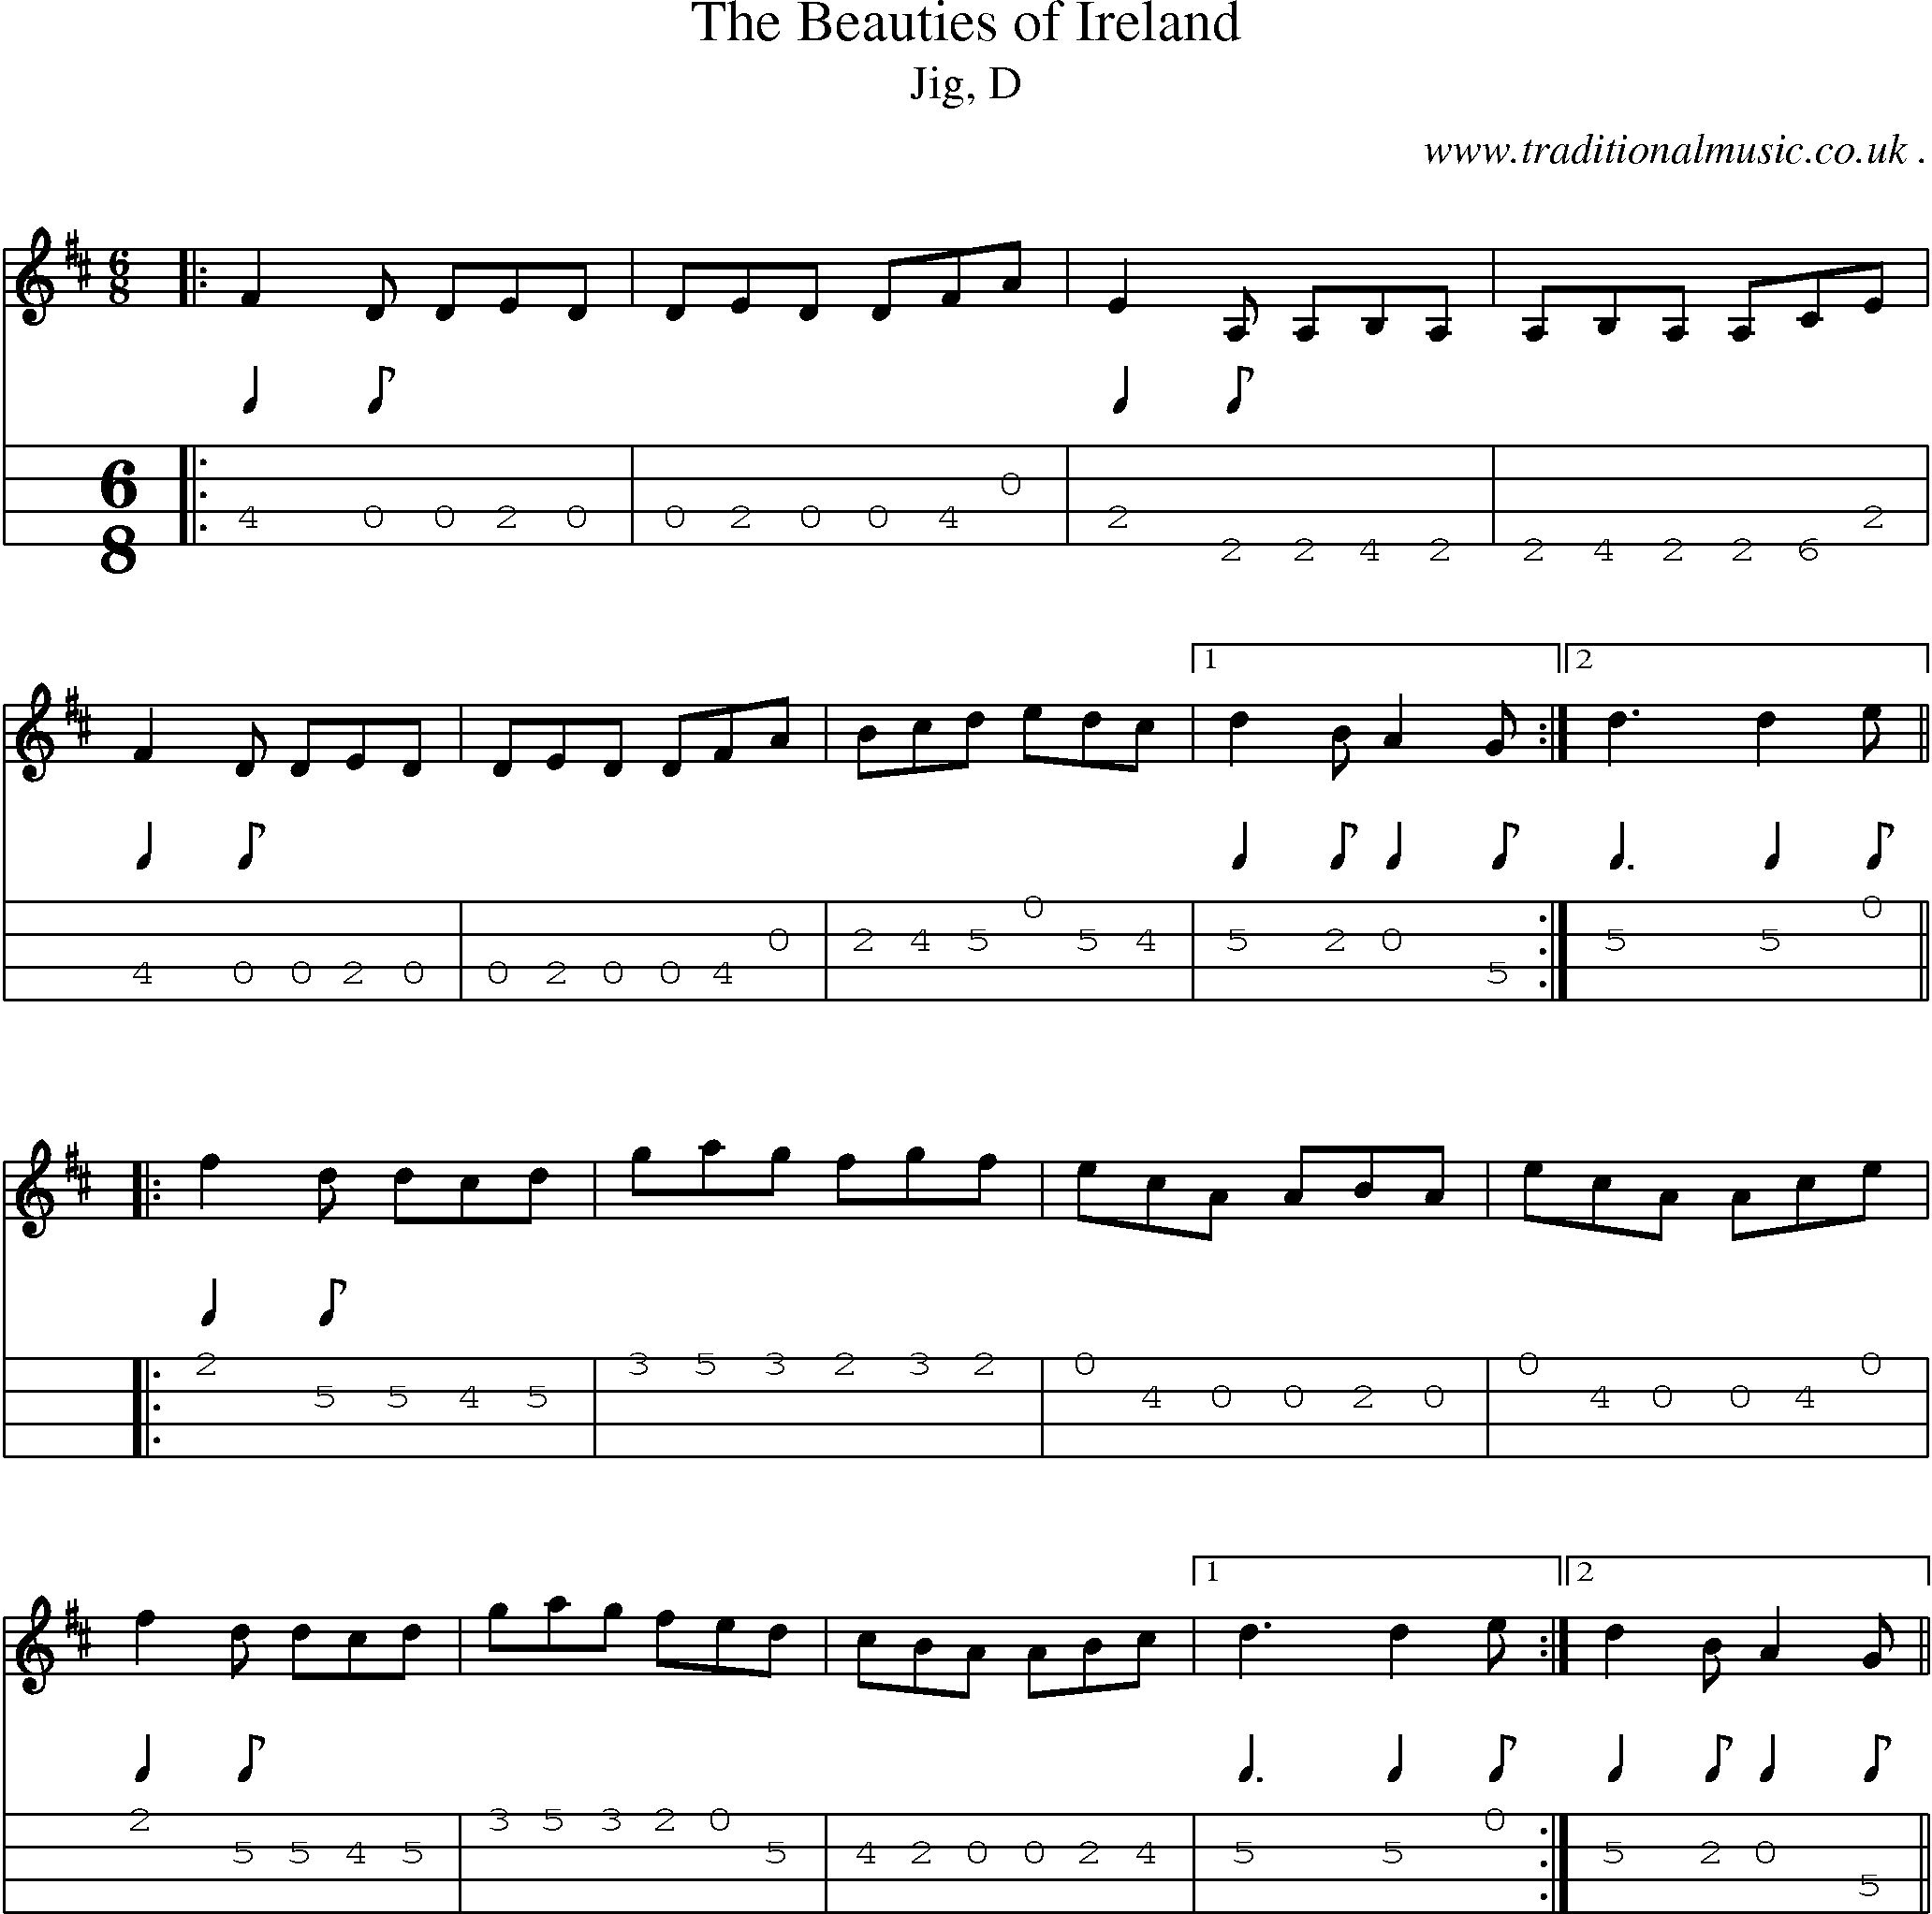 Sheet-music  score, Chords and Mandolin Tabs for The Beauties Of Ireland